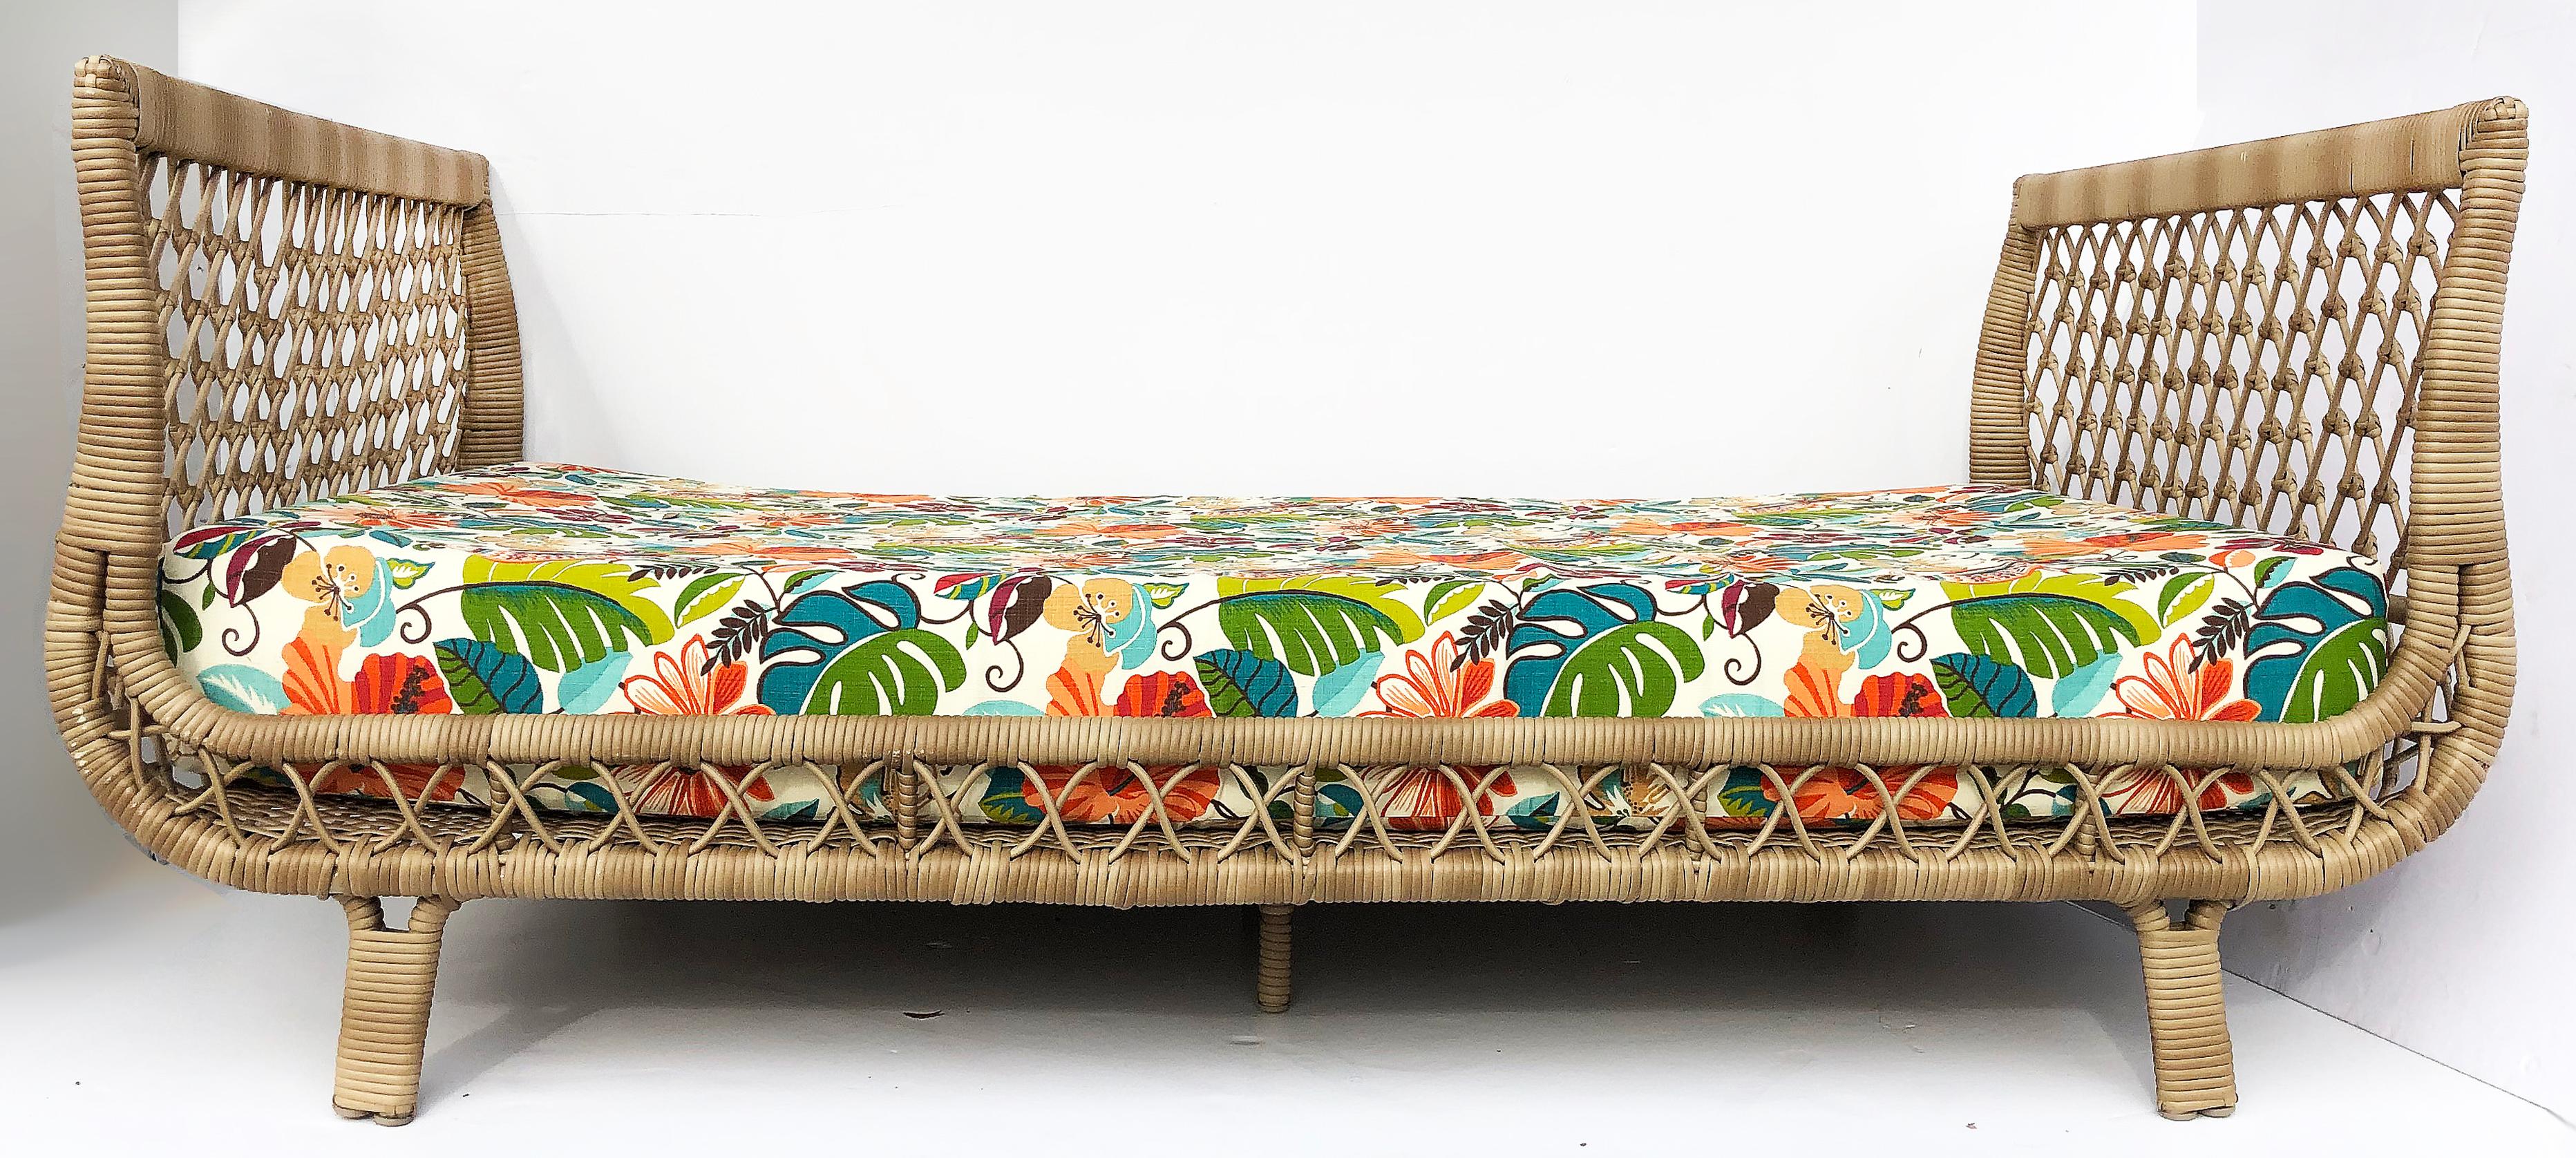 Vintage overscale rattan daybed lounge, reupholstered

Offered for sale is a classically formed coastal rattan daybed lounge. The overscaled mattress has recently been reupholstered in a playful tropical fabric.


Measures: 79